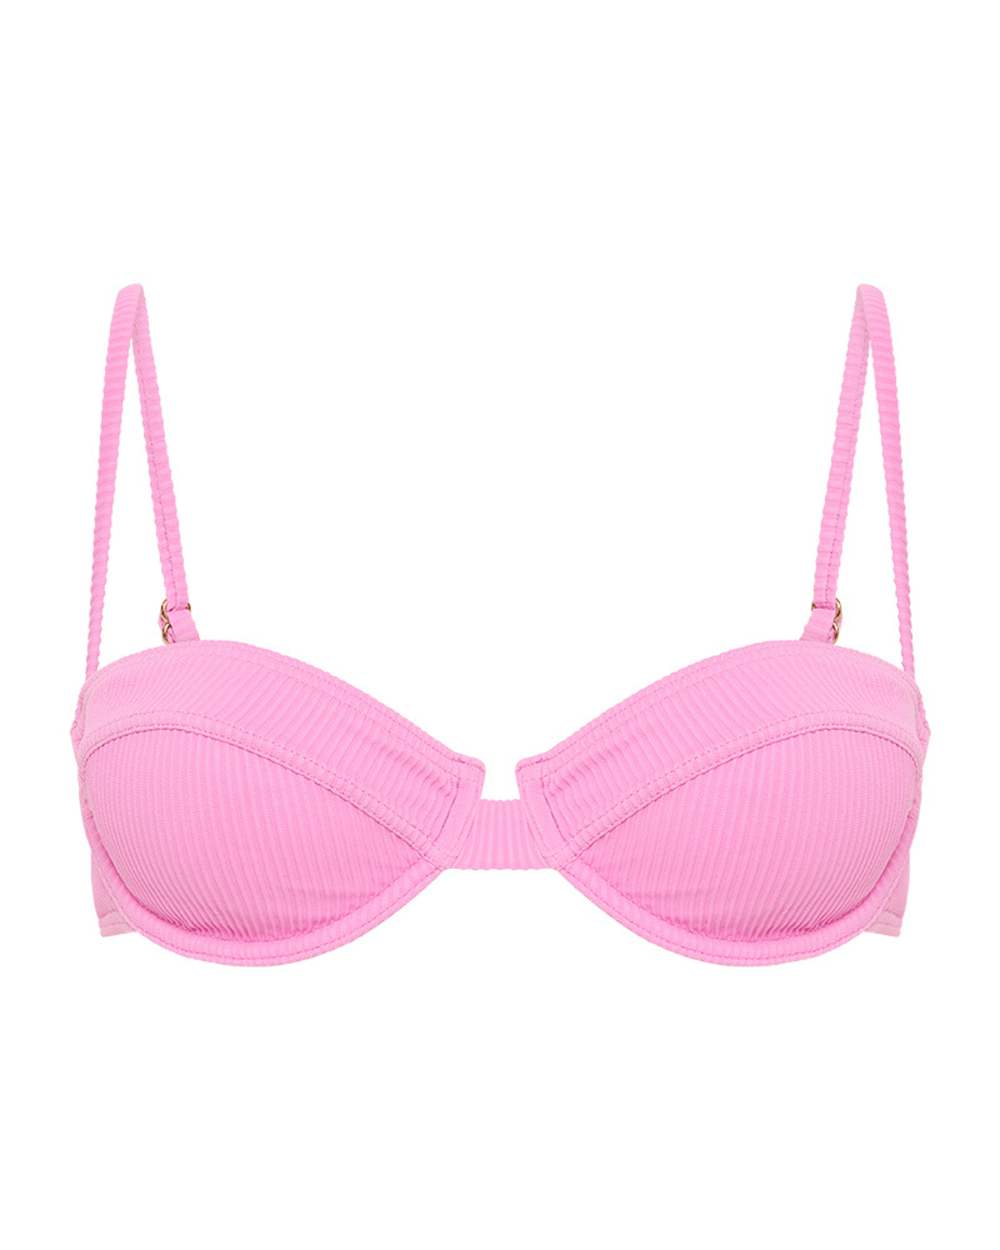 Pepper Lift Up Bra - Sienna Rose Pink Size 38 A - $32 (46% Off Retail) New  With Tags - From Emma